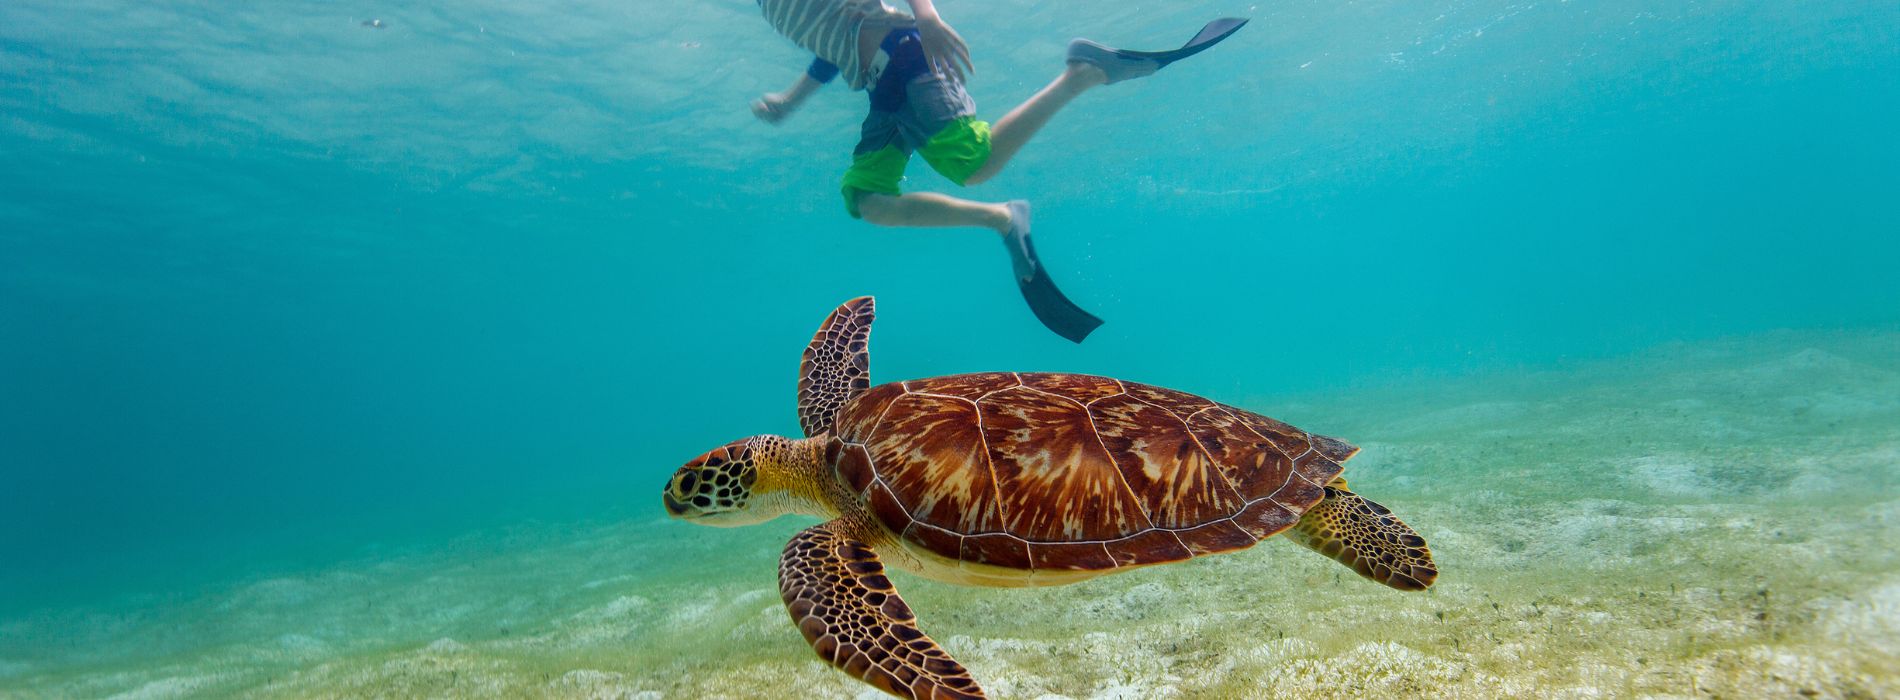 Snorkeling with Sea Turtles in St. Croix: A Magical Underwater Experience